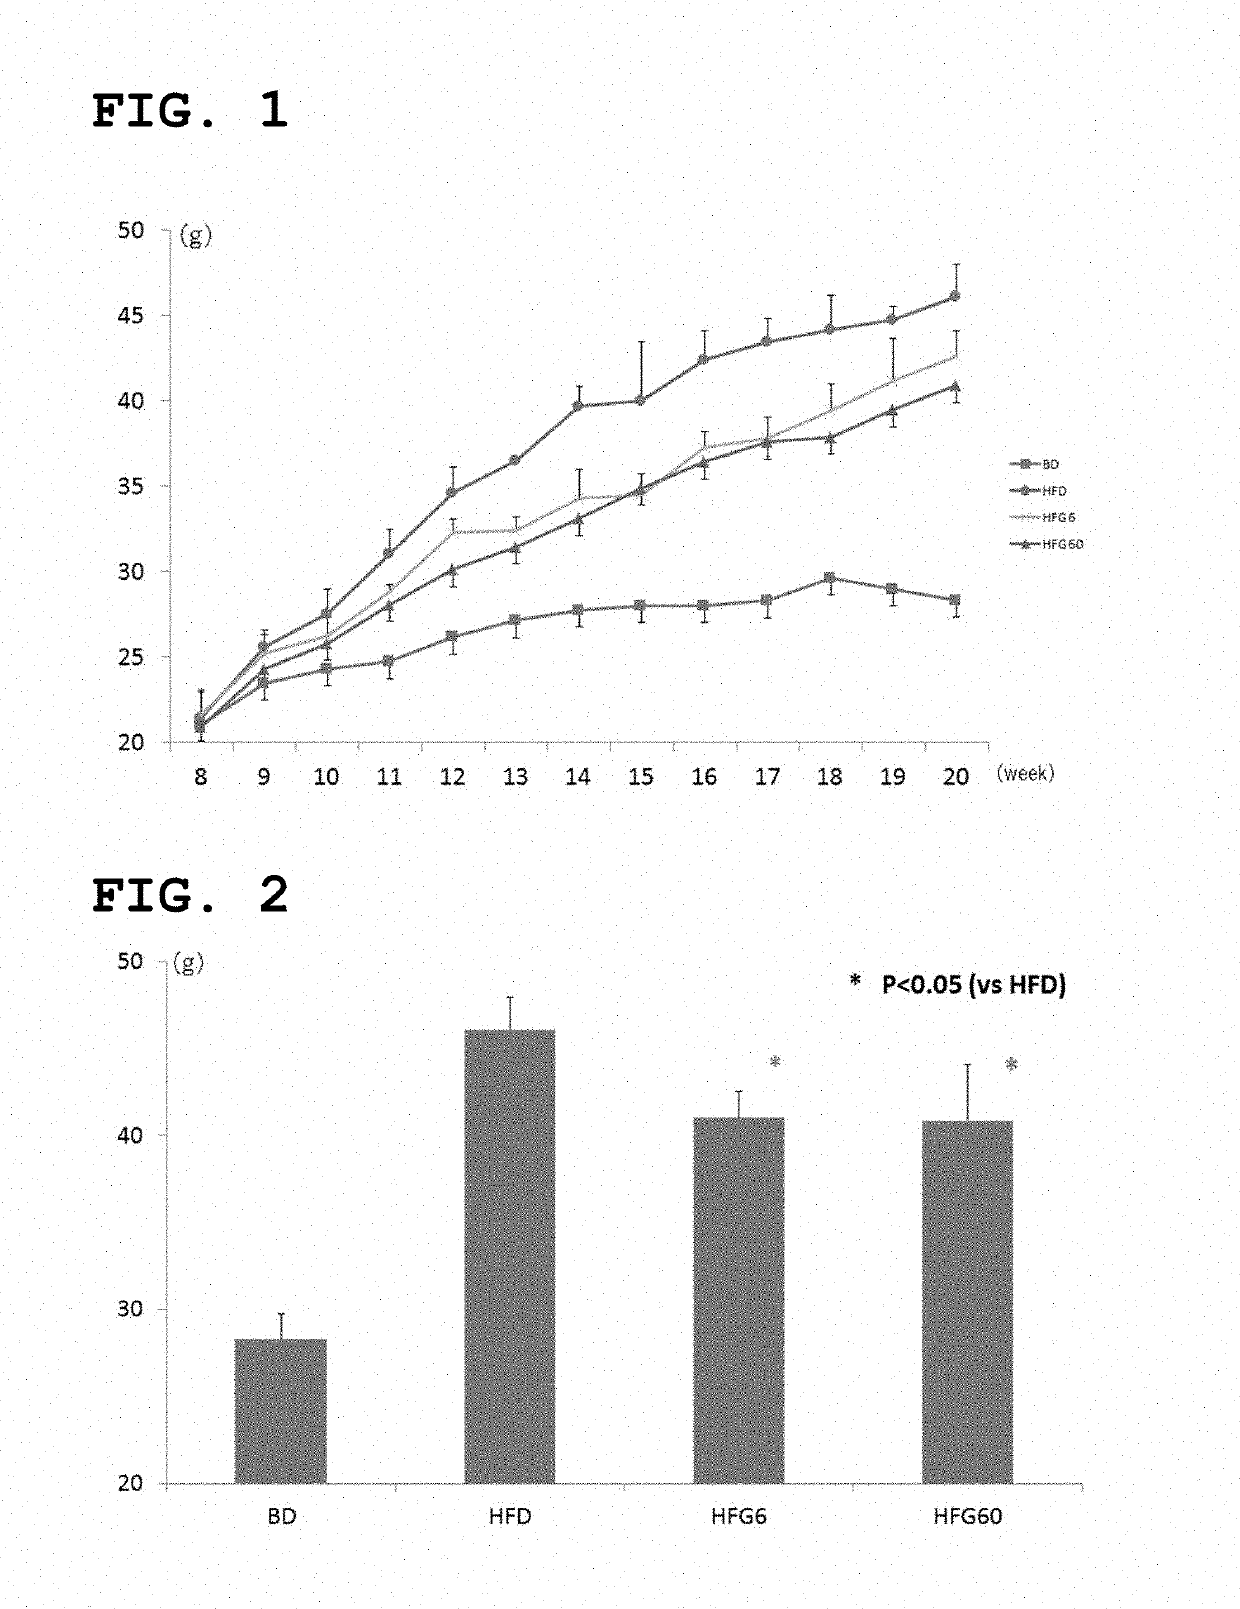 Composition for improving or preventing nonalcoholic fatty liver